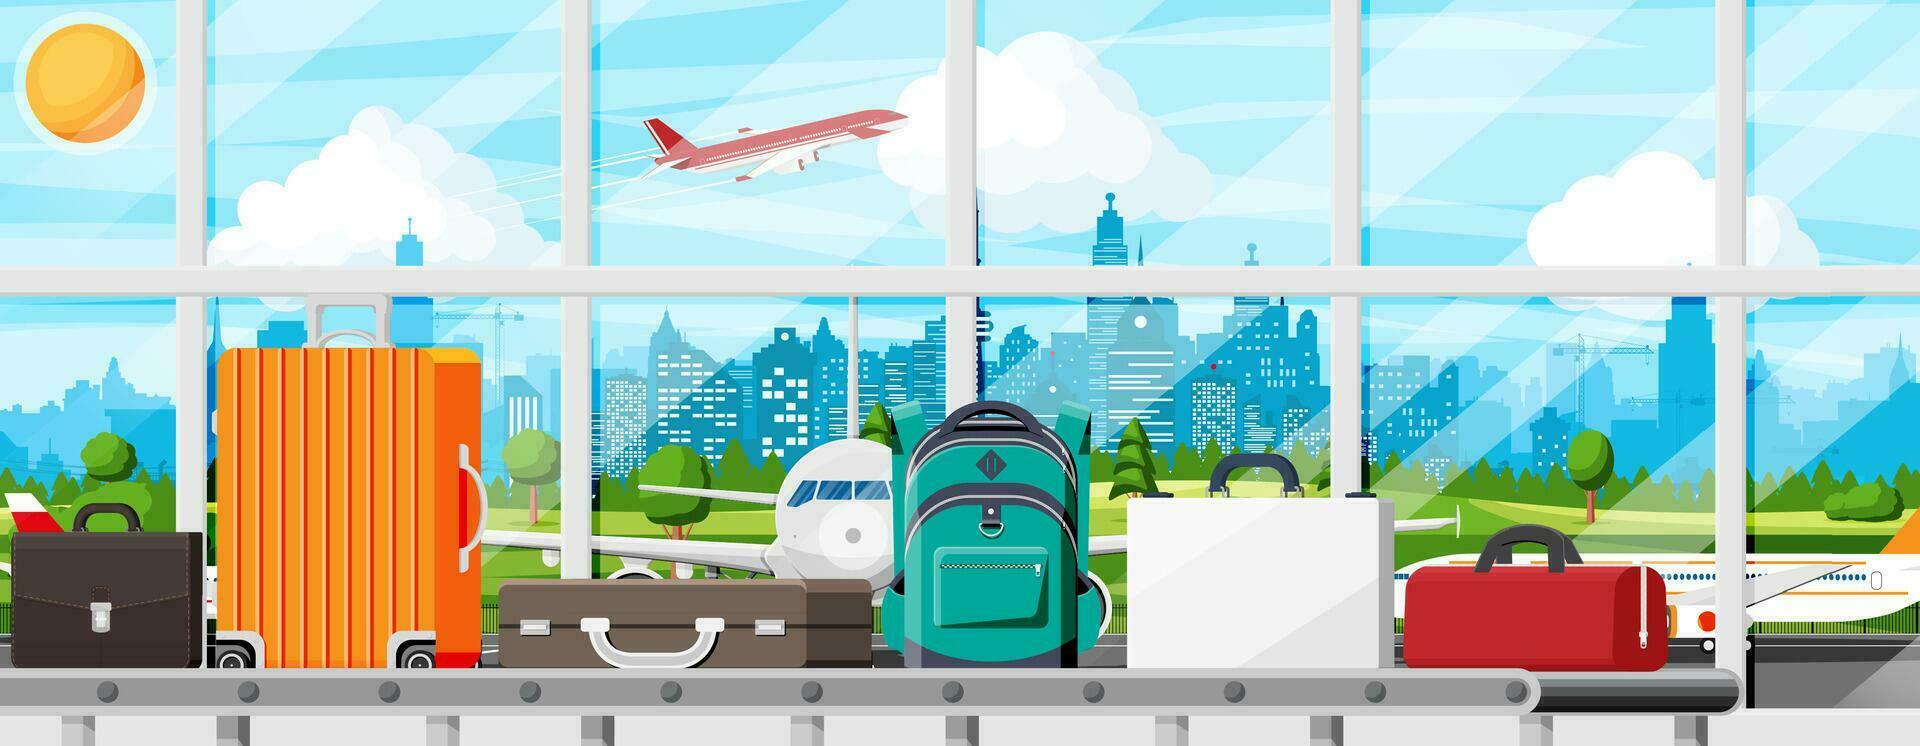 Luggage Carousel Against Airport Window With Taking Off Plane. Conveyor Belt With Passenger Luggage. Baggage Claim In Airport Interior. Logistic And Delivery. Cartoon Flat Vector Illustration